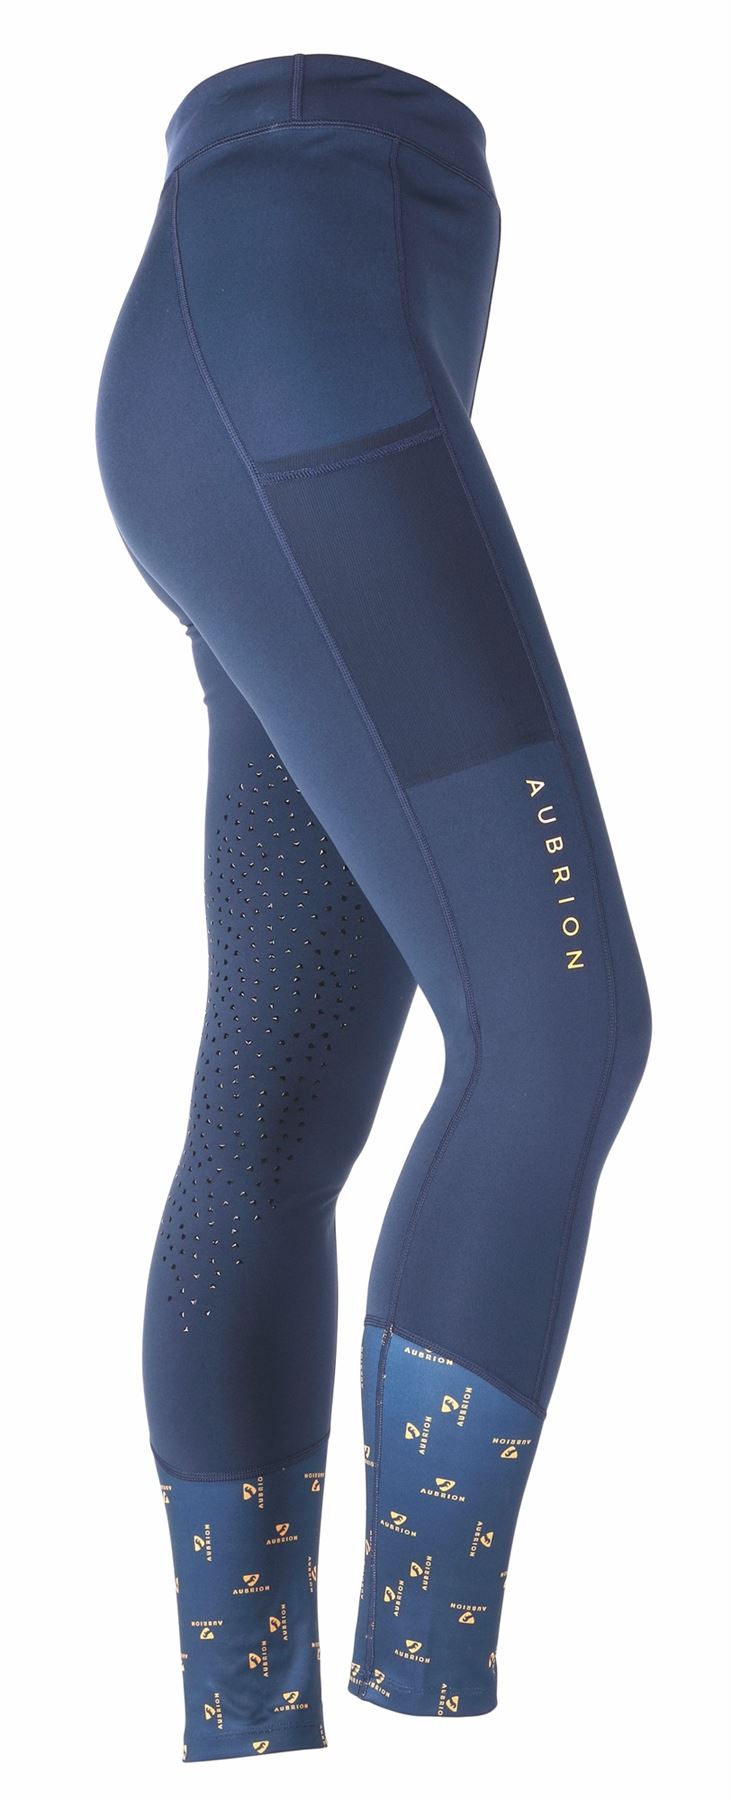 Shires Aubrion Morden Summer Riding Tights-Maid - Just Horse Riders